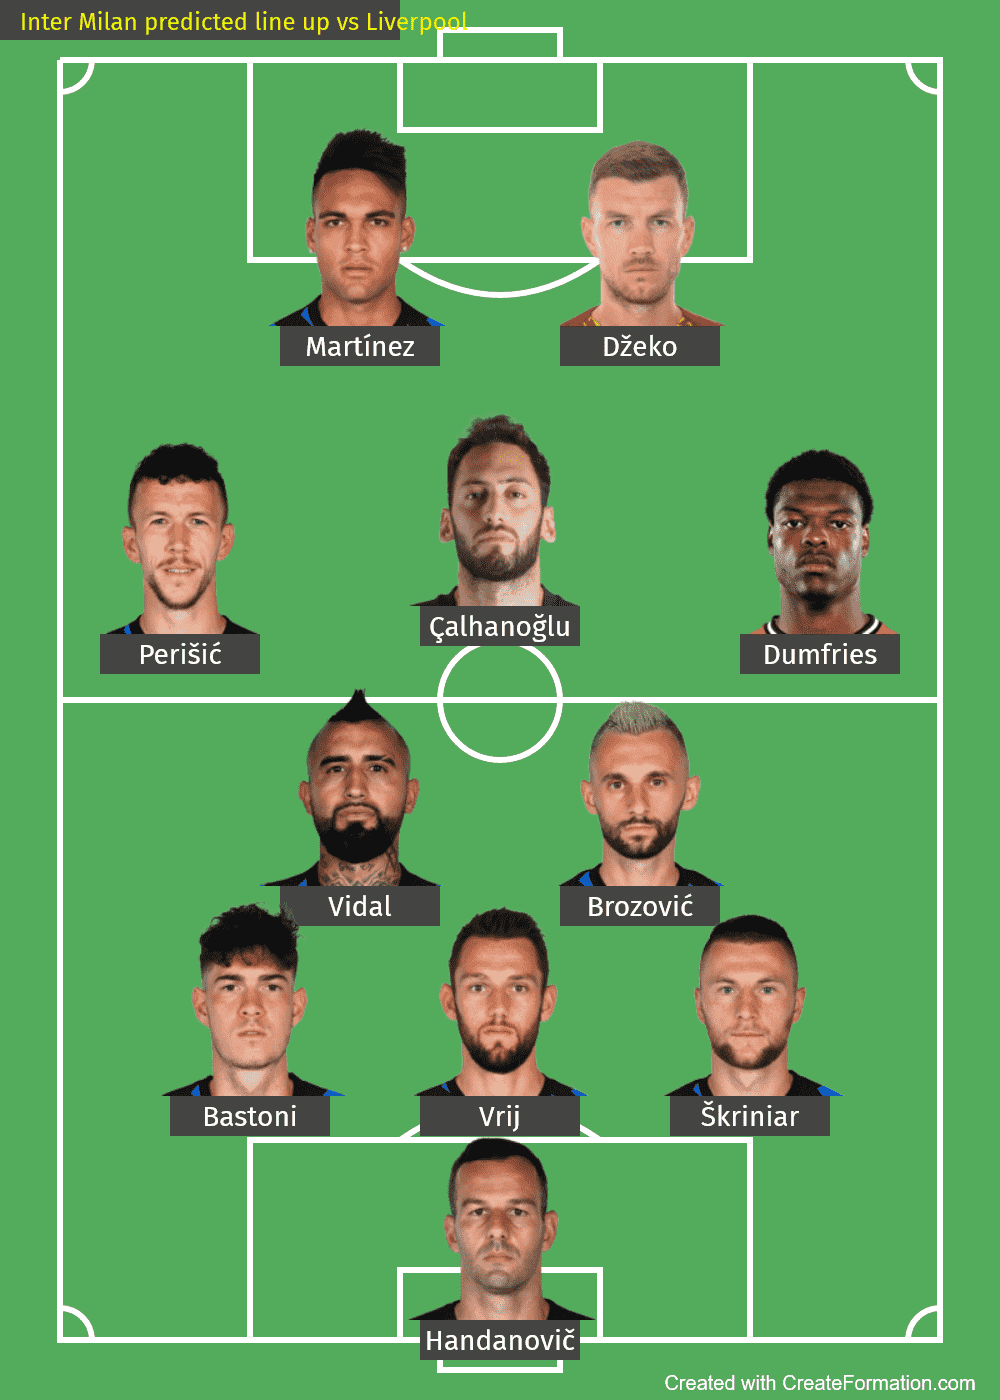 Inter predicted line up vs Liverpool-2022-UCL